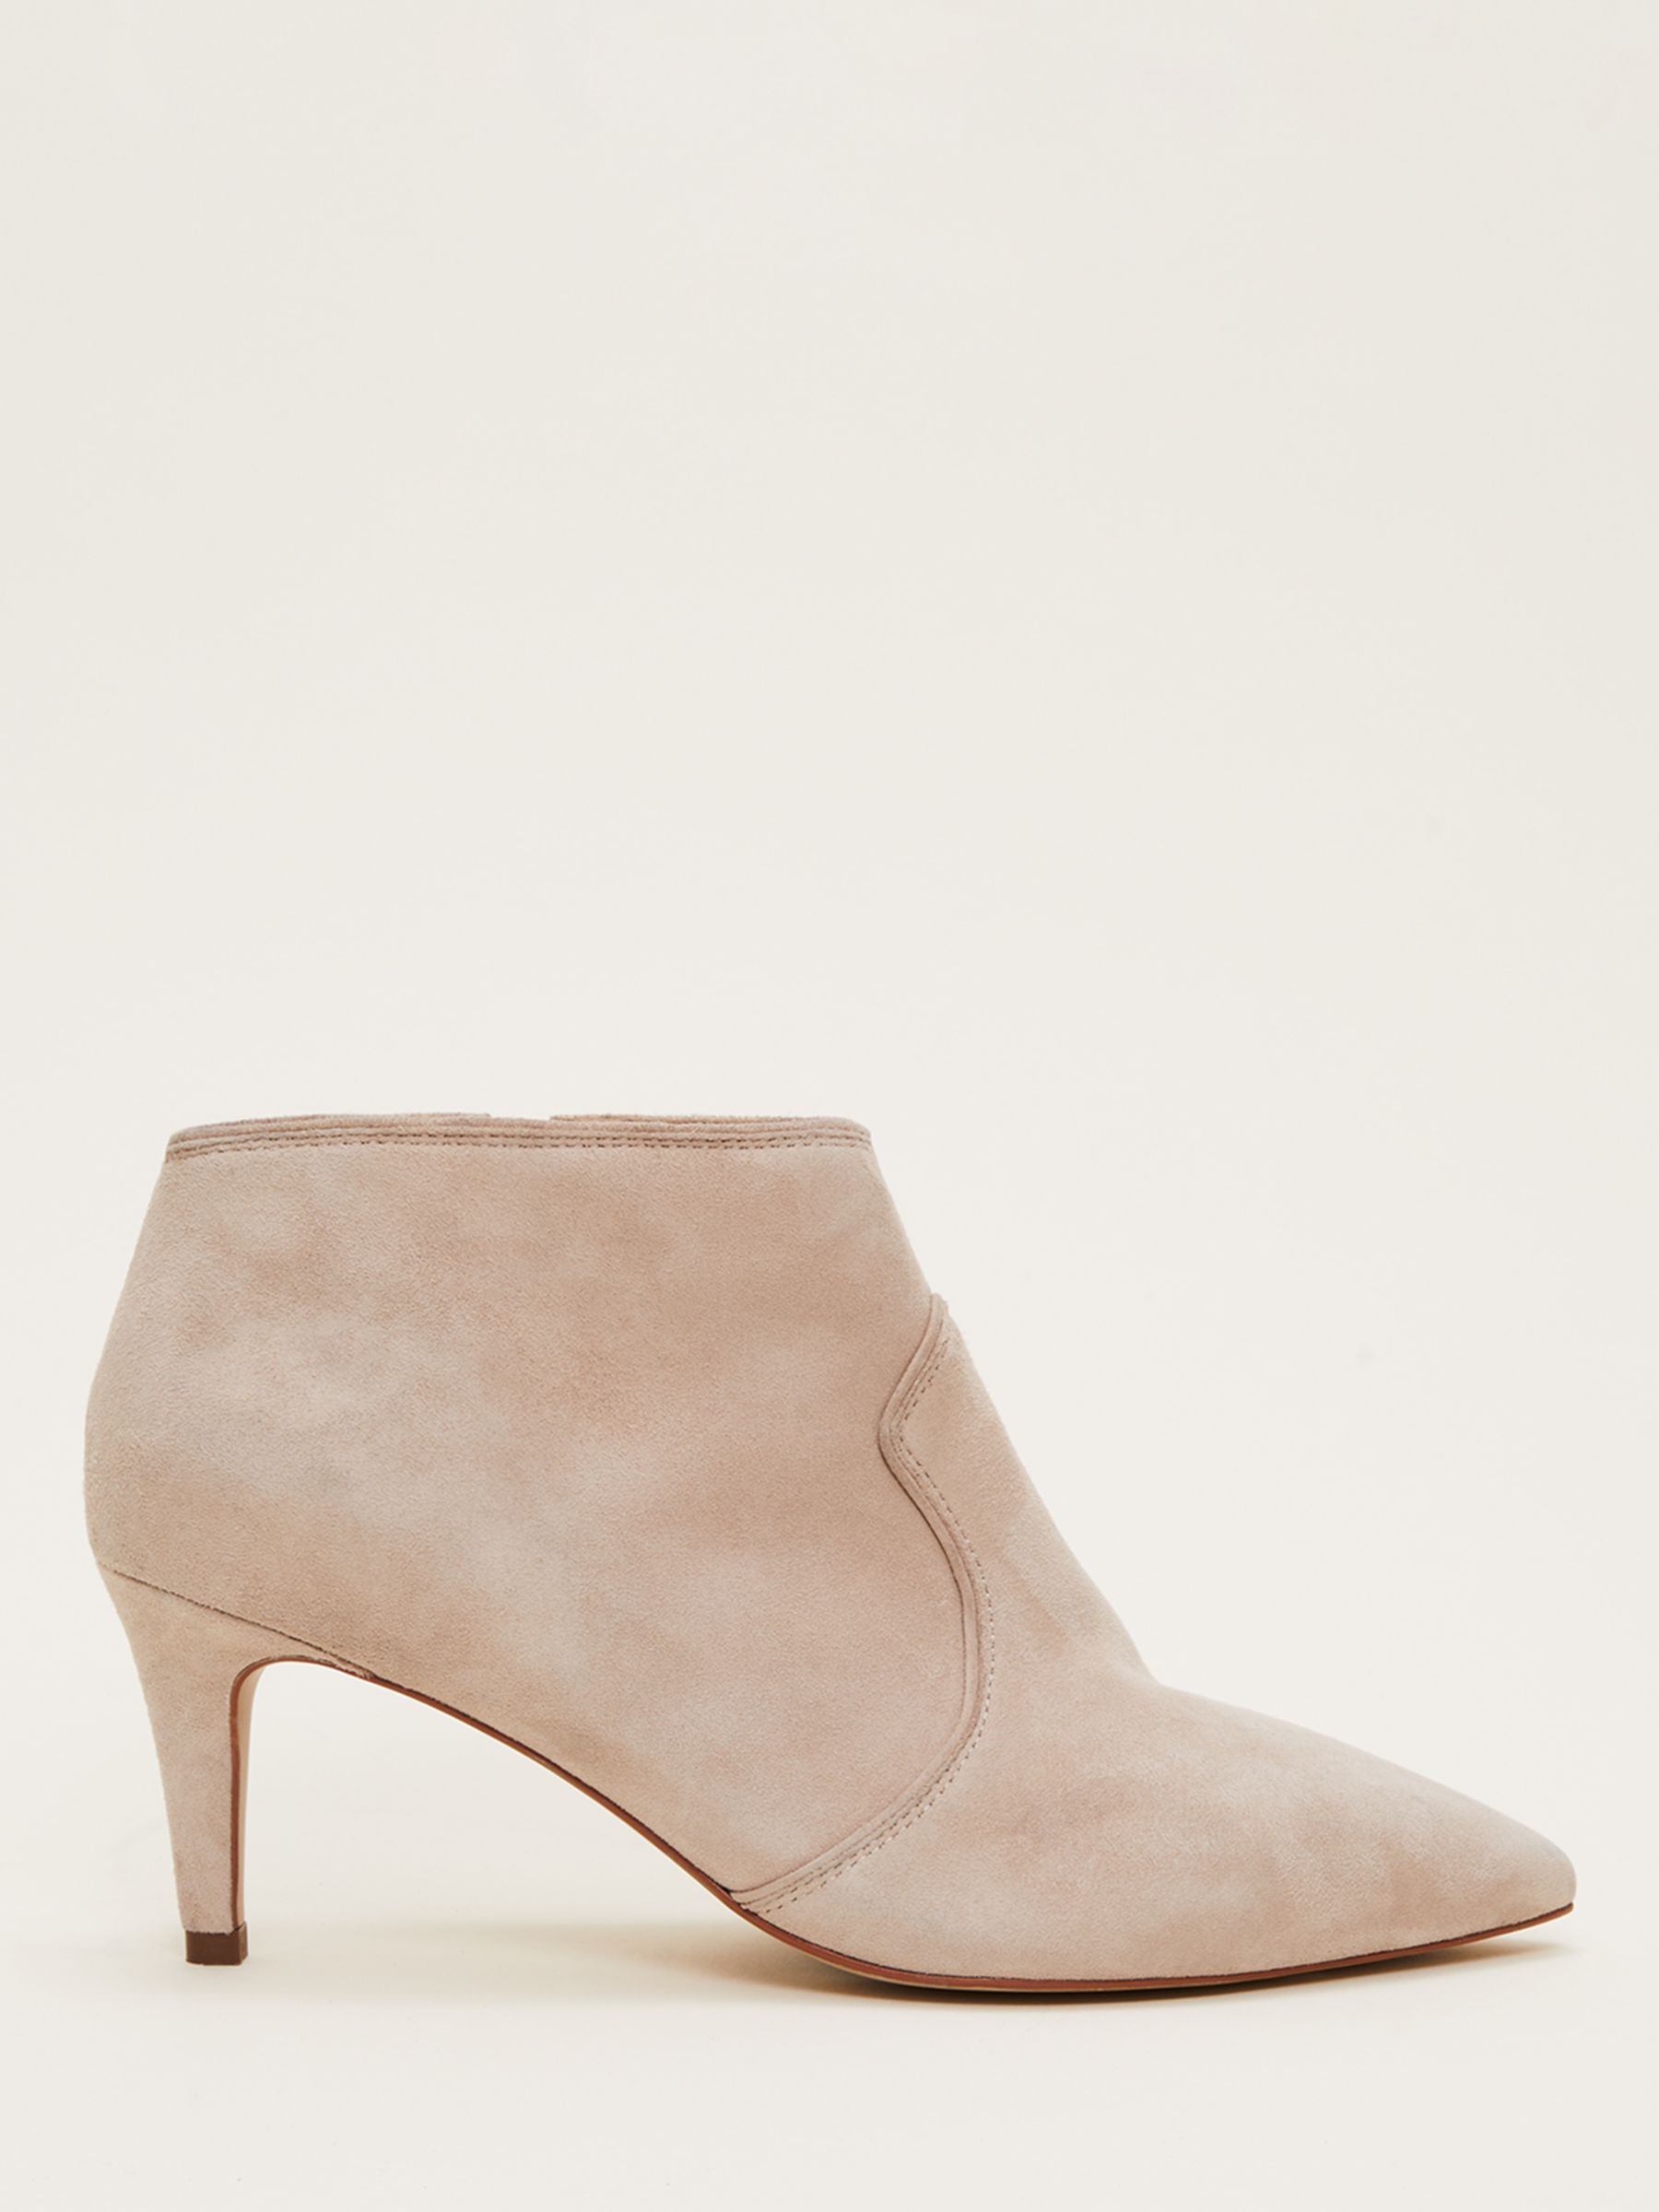 Buy Phase Eight Suede Shoe Boots, Neutral Online at johnlewis.com